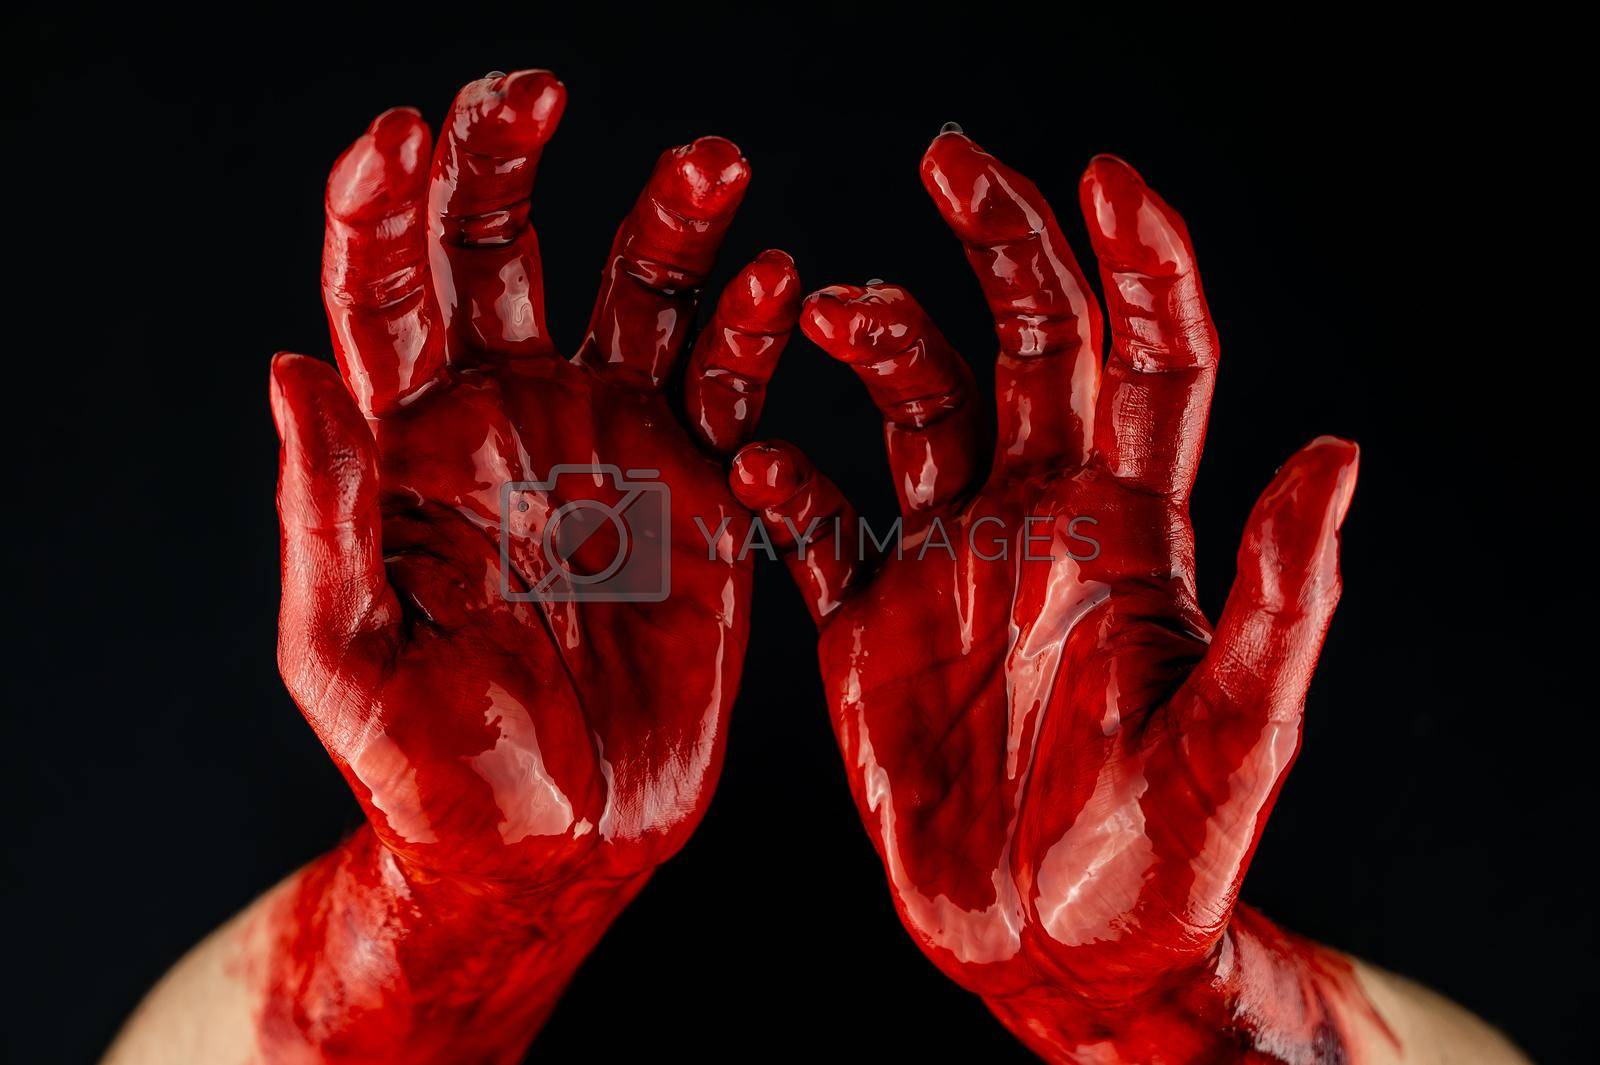 Royalty free image of Women's hands in blood on a black background. by mrwed54